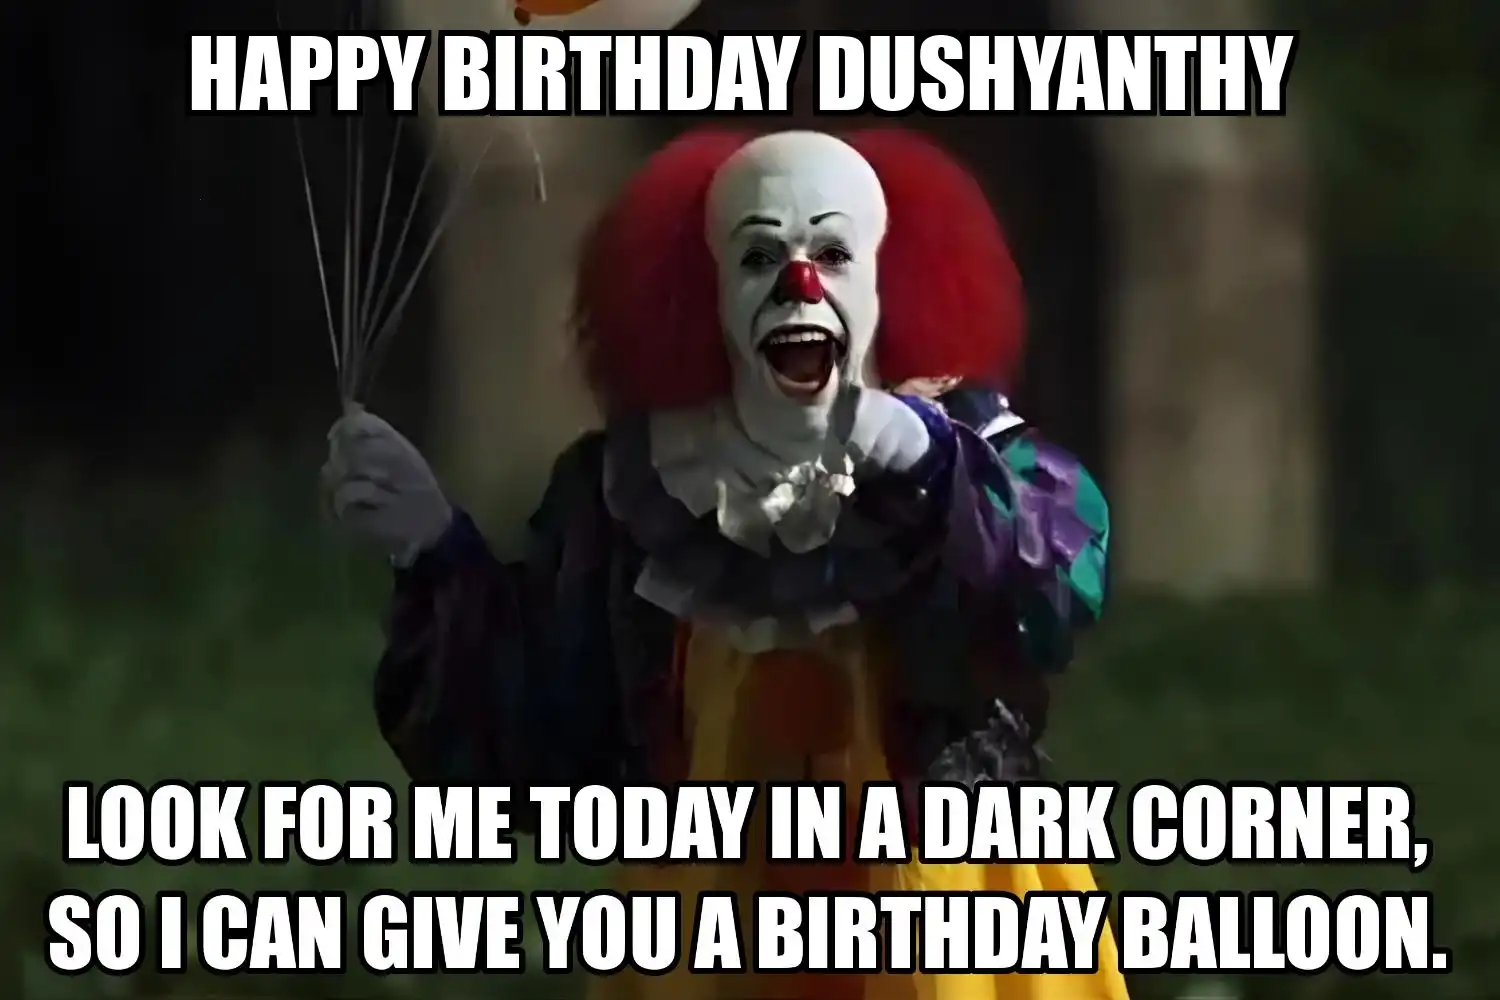 Happy Birthday Dushyanthy I Can Give You A Balloon Meme